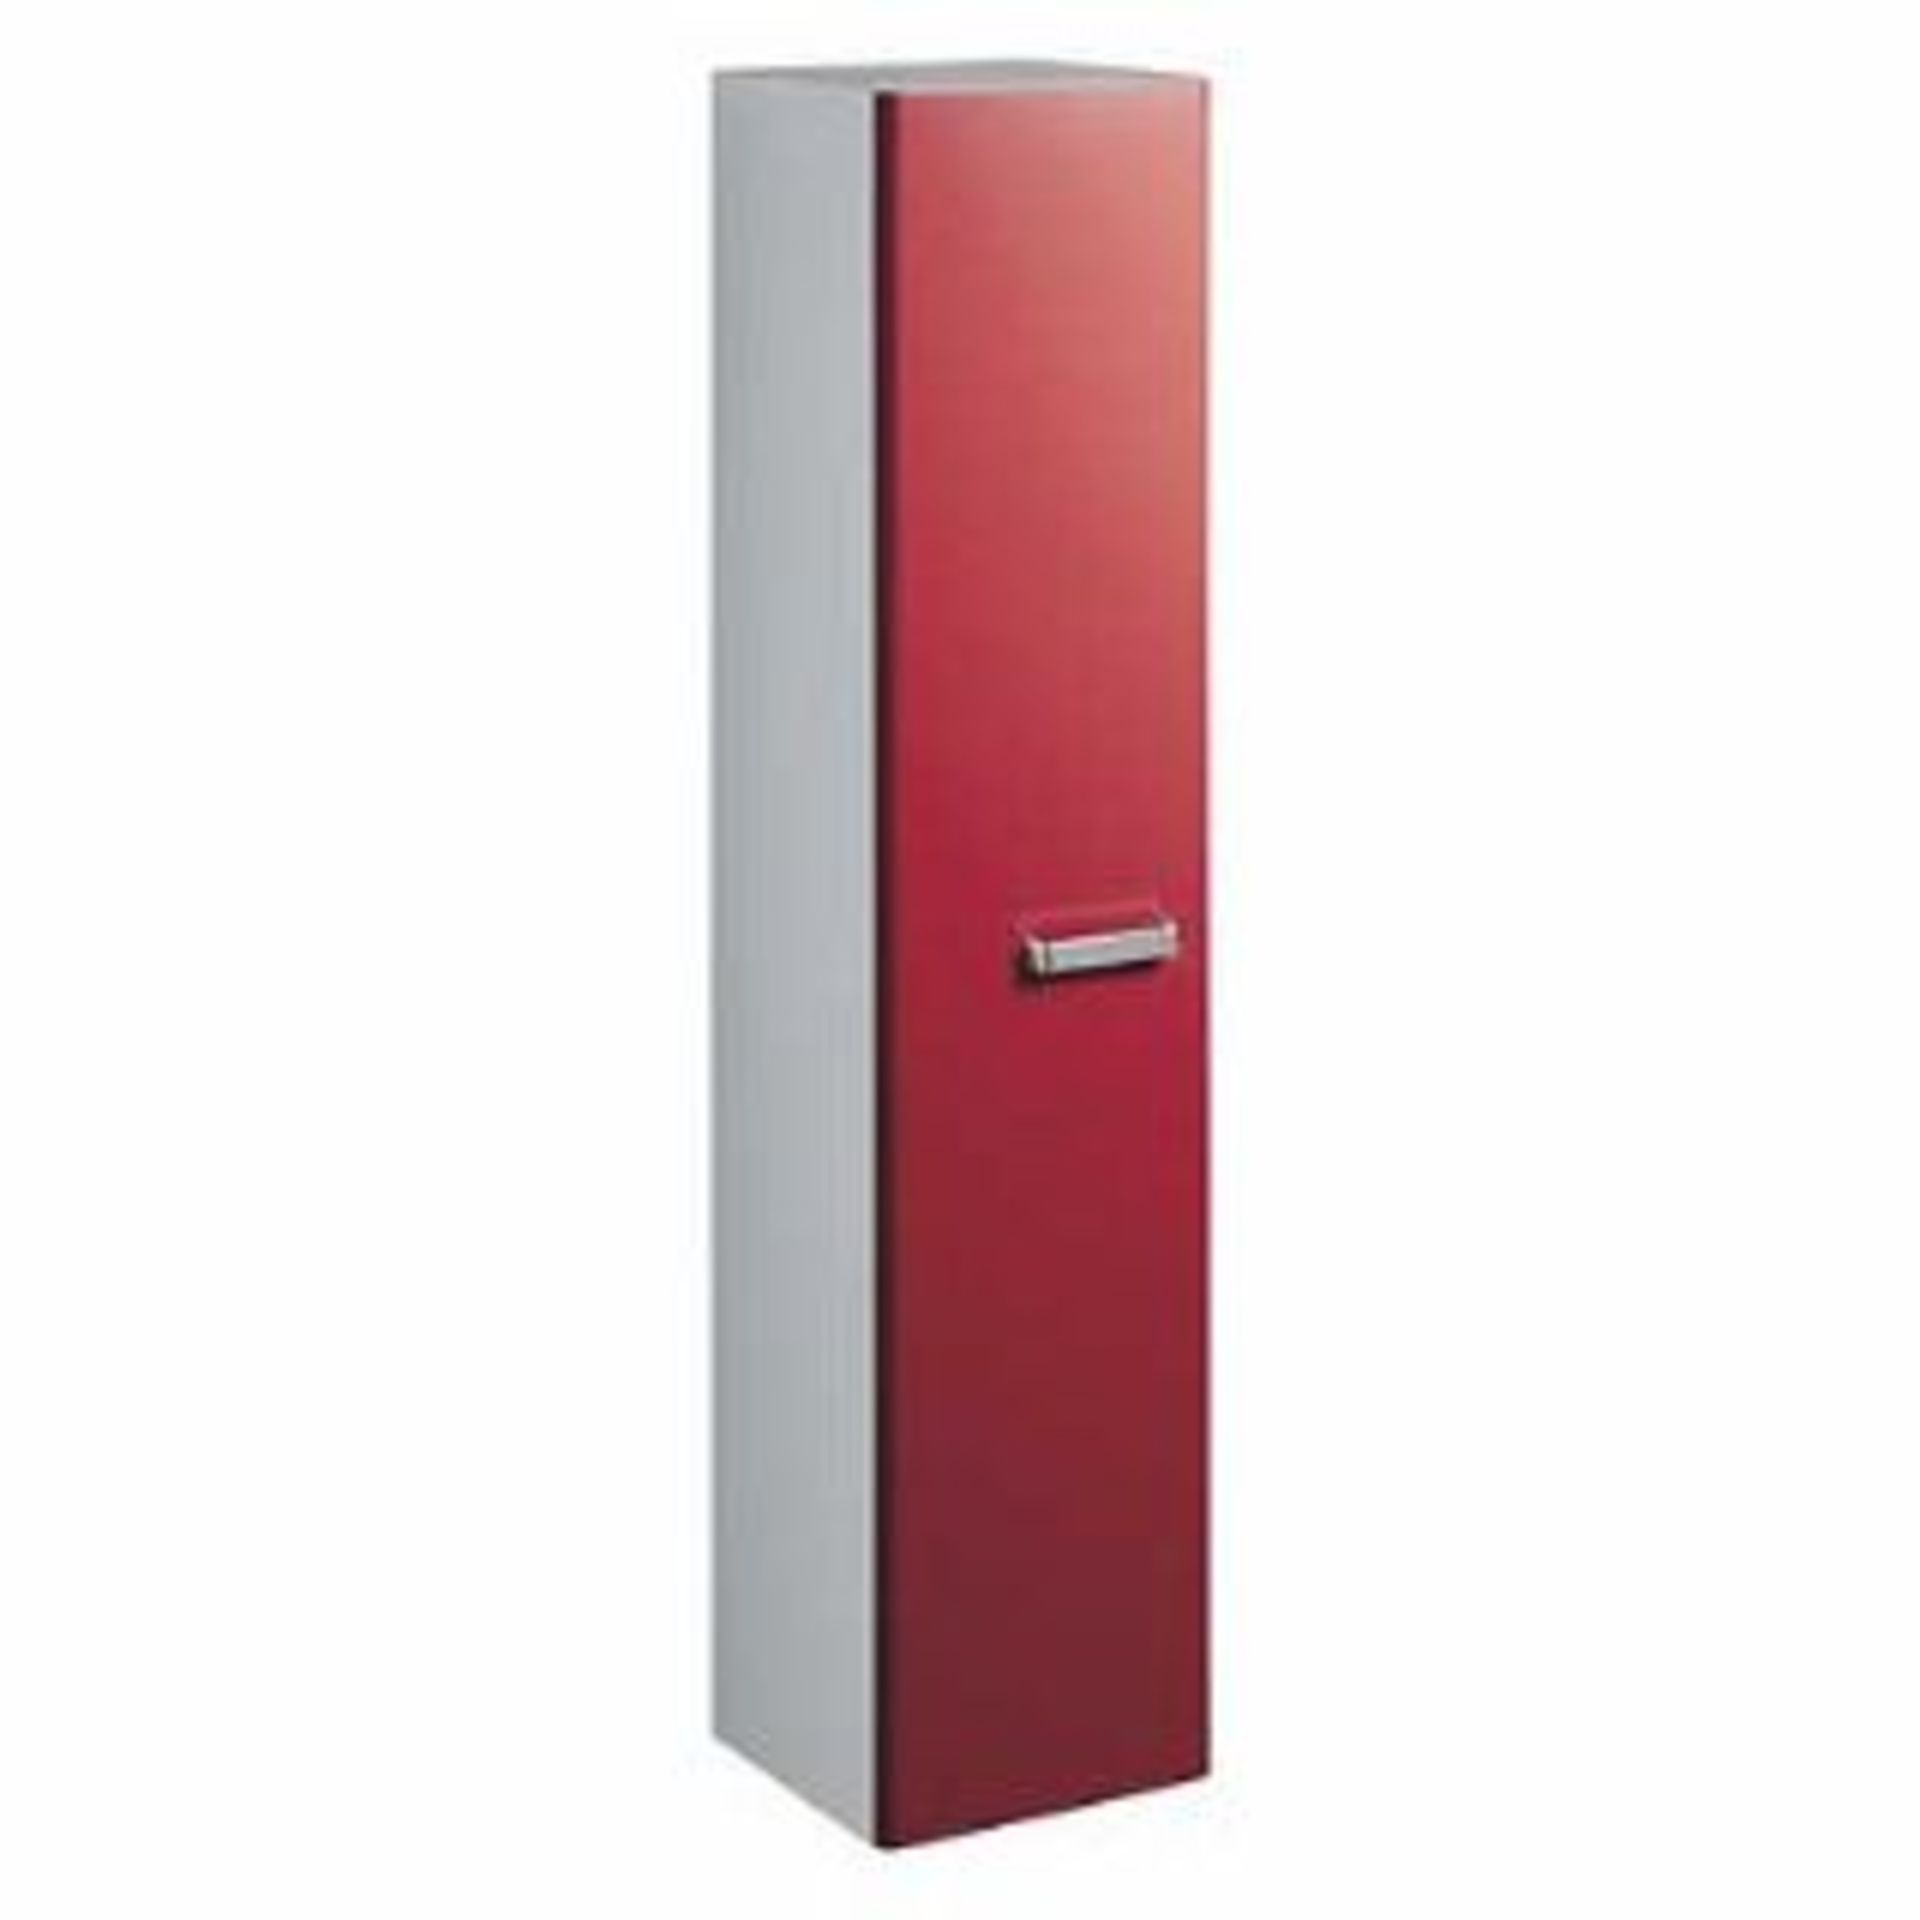 Brand New (LV123) Twyfords 1730mm Red Gloss Tall Storage Unit. RRP £666.99. Red gloss finish Wall mo